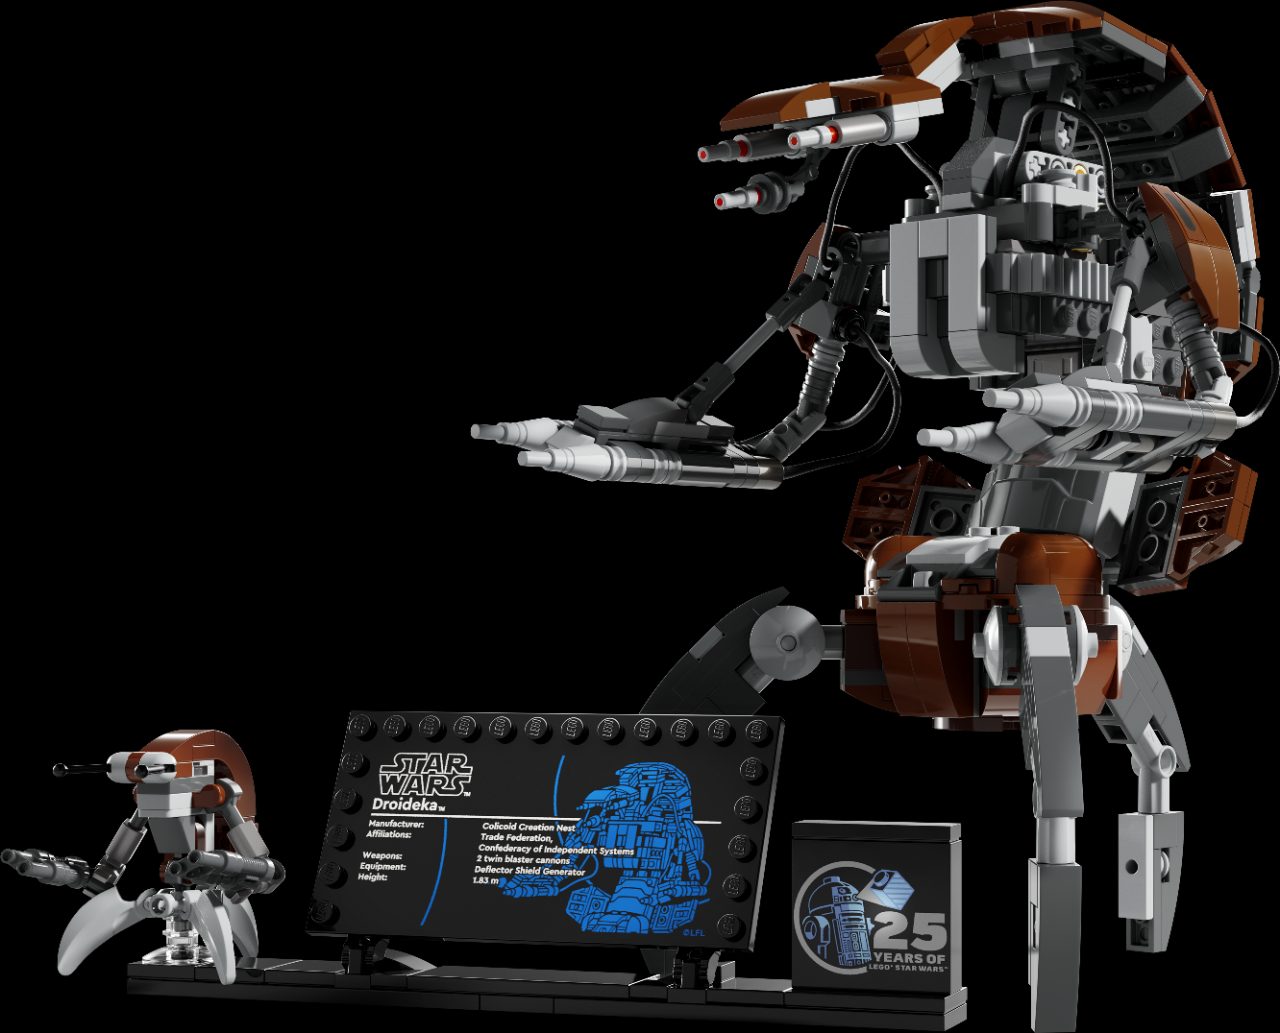 TIE Interceptor to Darth Maul's Infiltrator: Epic new Stars Wars Lego sets dropping this week